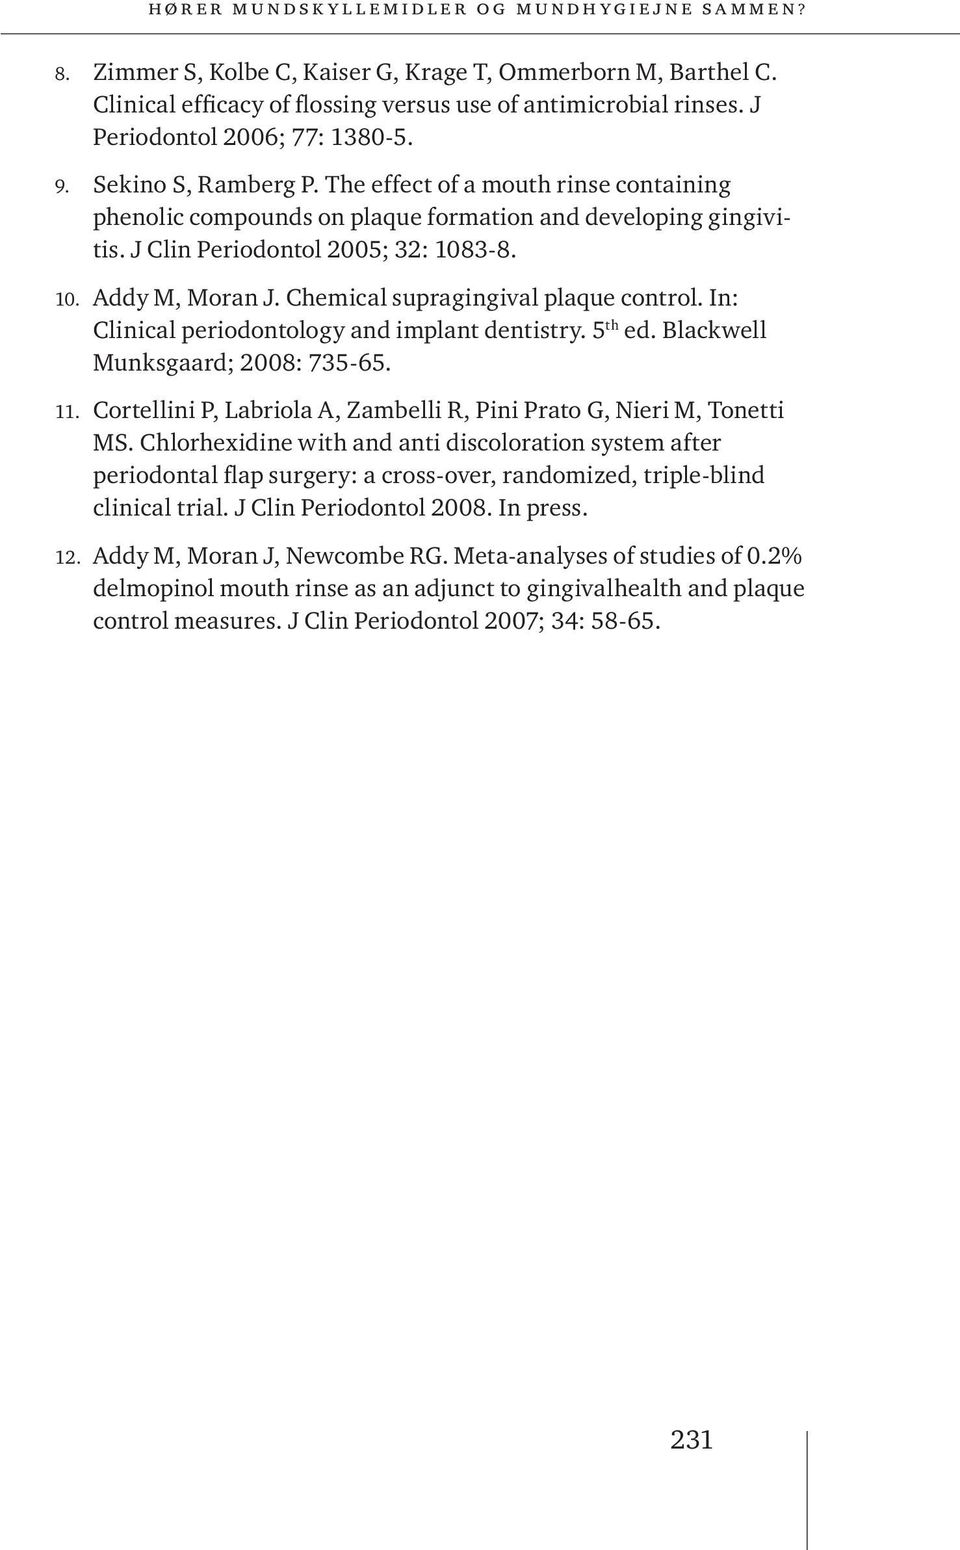 Chemical supragingival plaque control. In: Clinical periodontology and implant dentistry. 5 th ed. Blackwell Munksgaard; 2008: 735-65. 11.